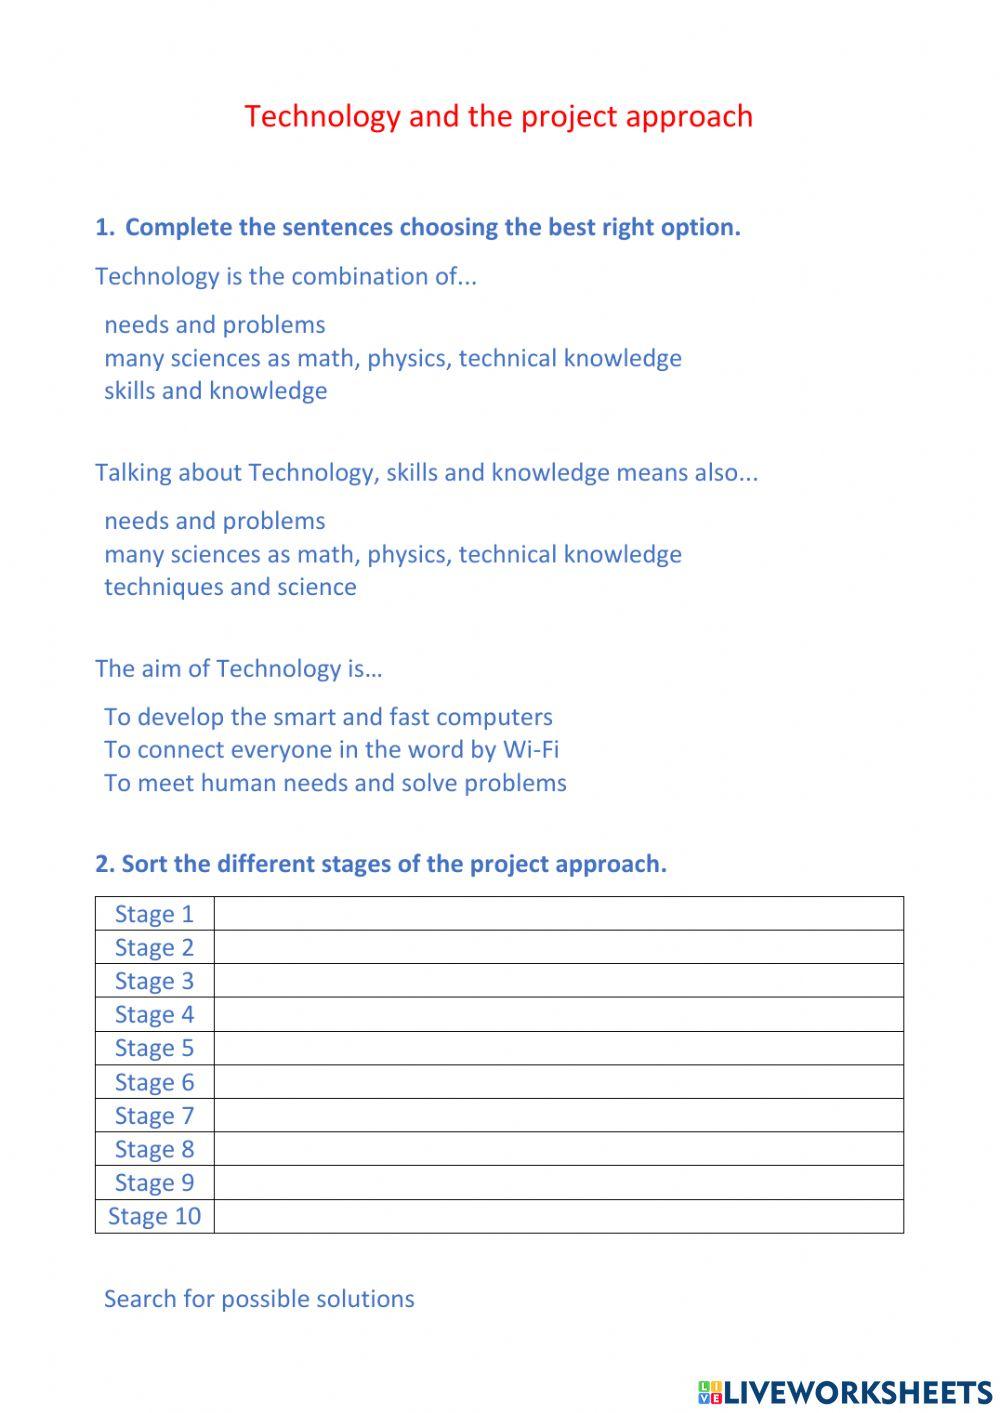 Technology and the project approach